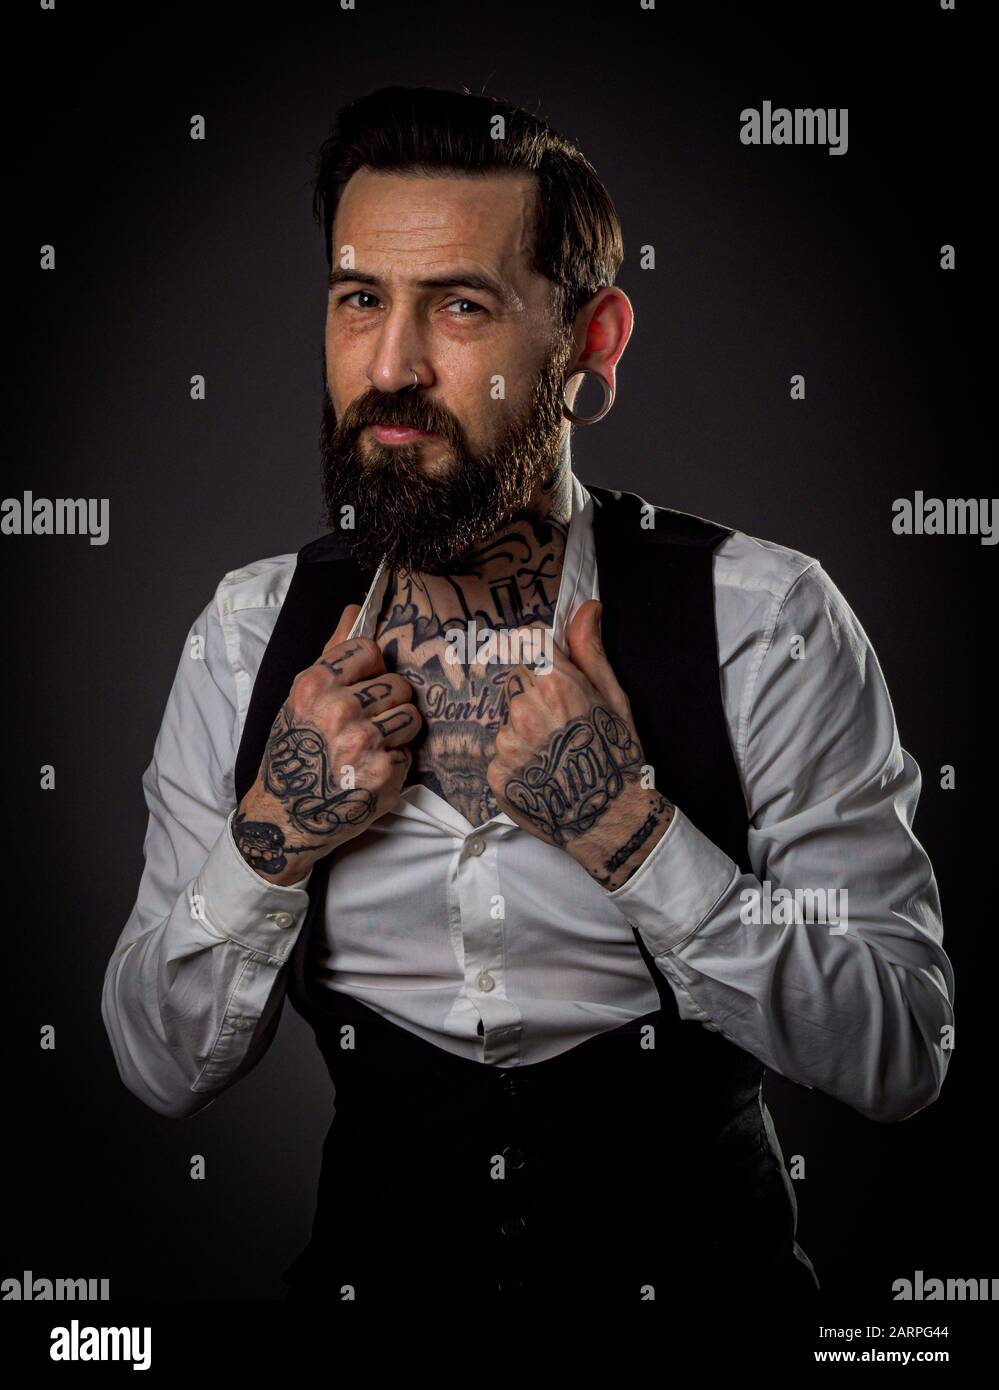 Studio Portrait of a male model with beard and tattoos Stock Photo